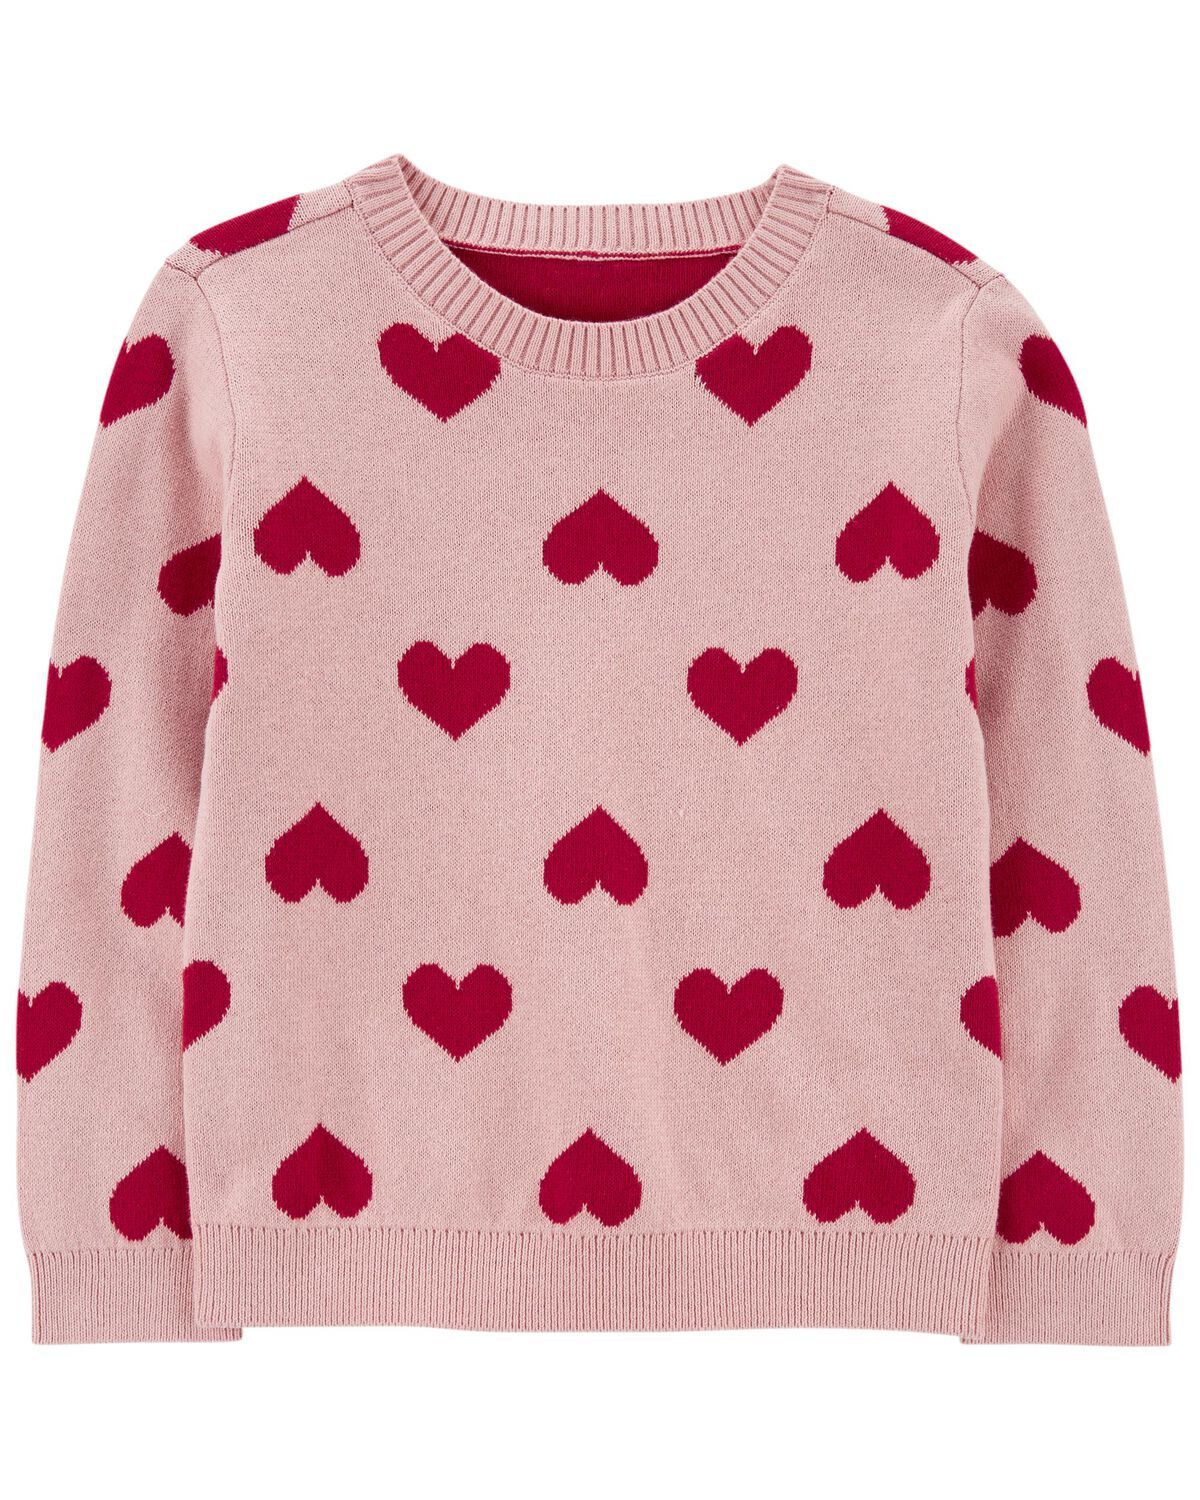 Pink Baby Valentine's Day Heart Sweater
 | carters.com | Carter's